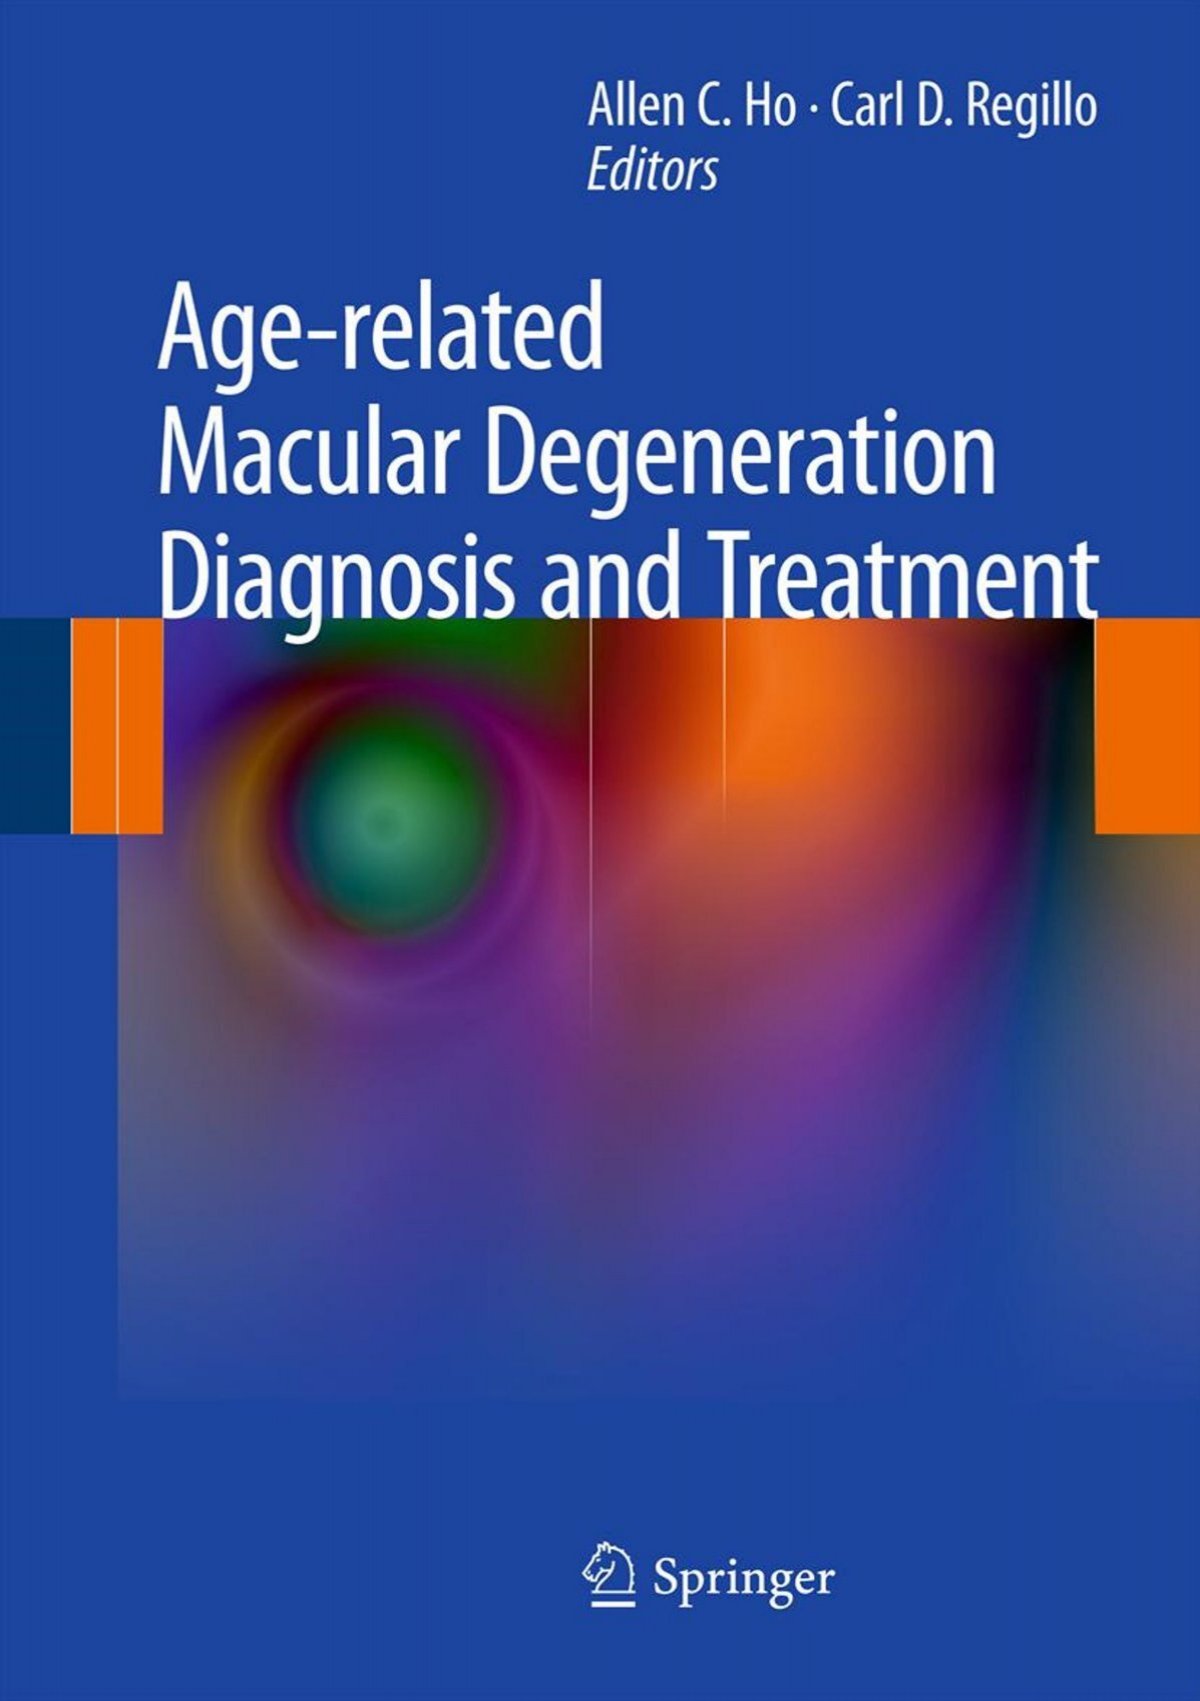 Age-related Macular Degeneration Diagnosis and Treatment.pdf